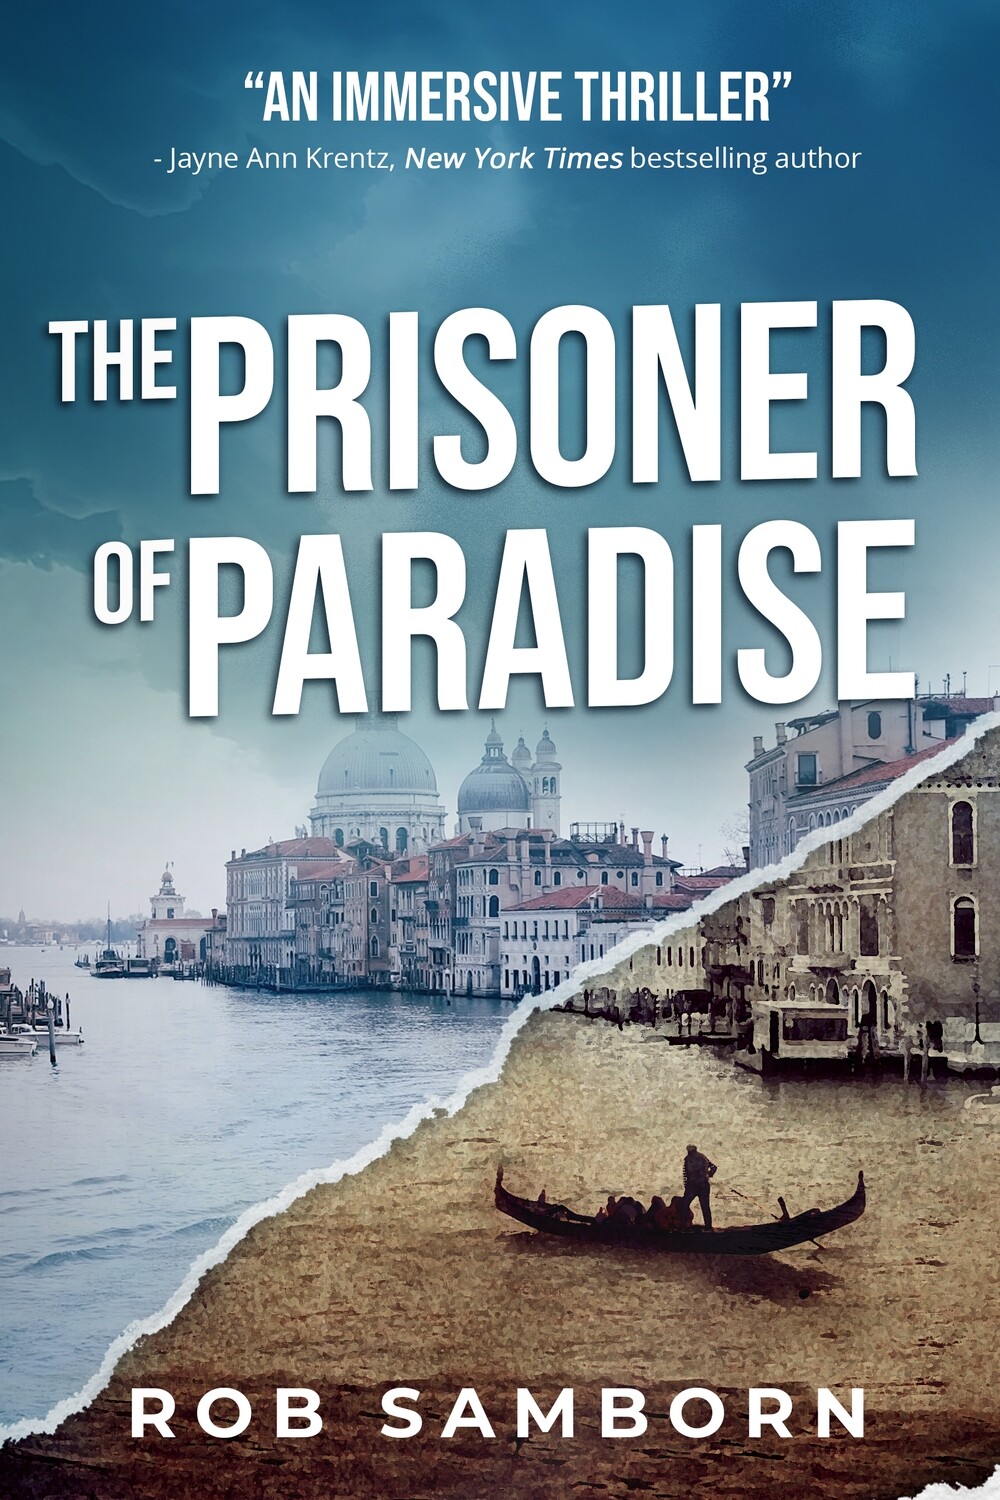 The Prisoner of Paradise (Painted Souls, Book 1)